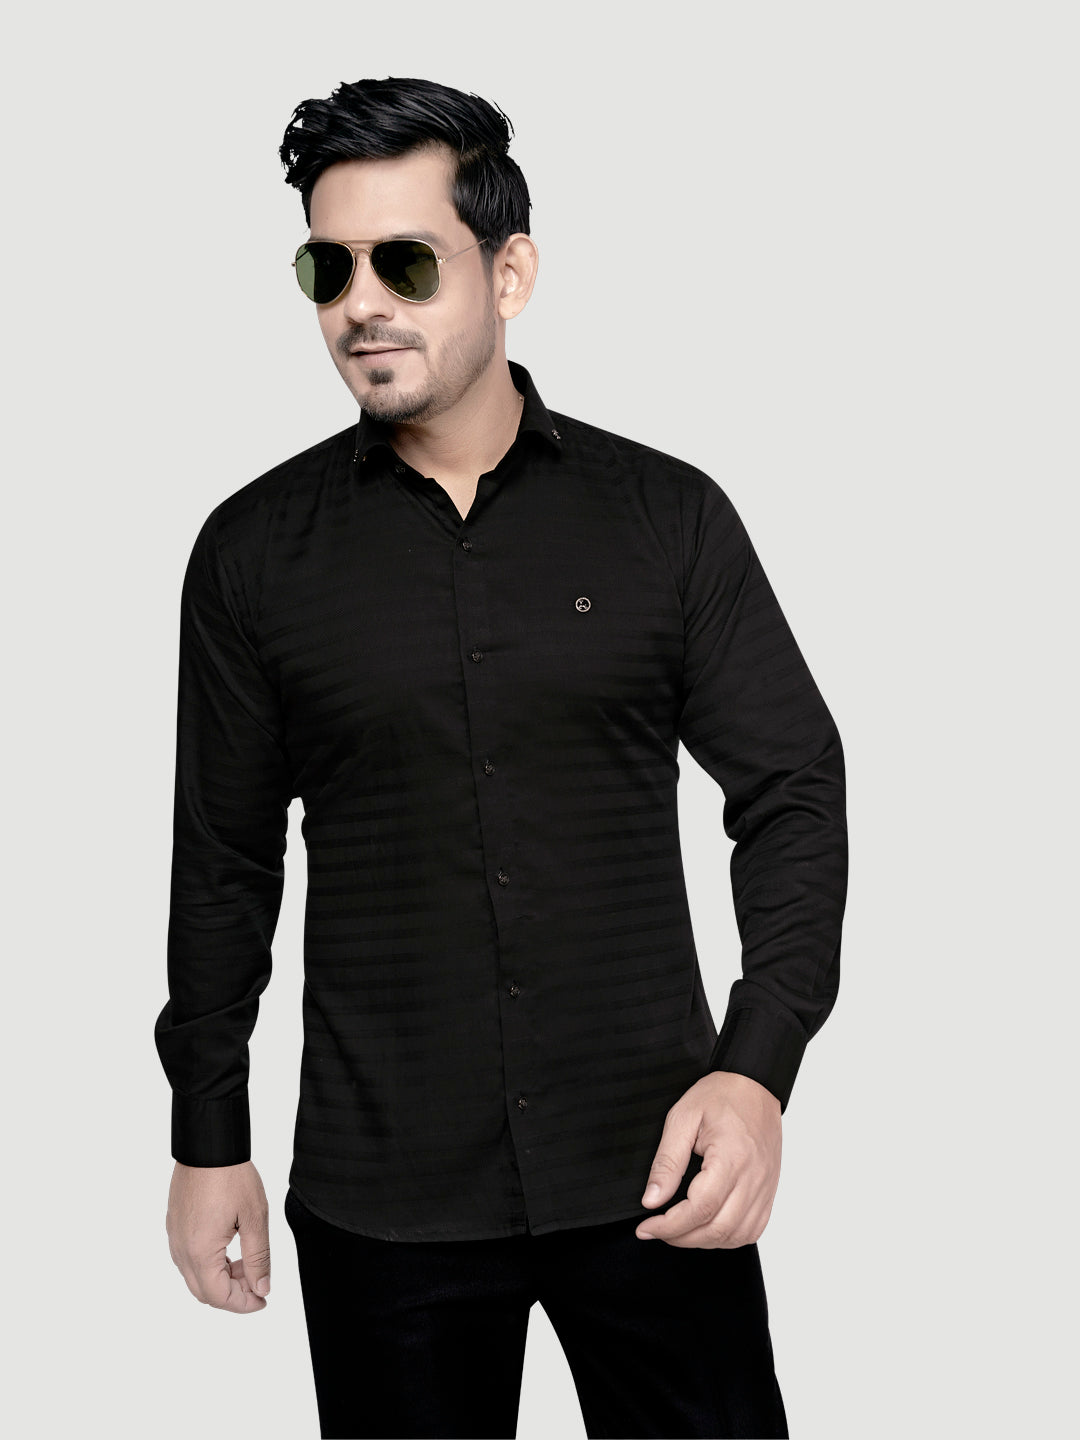 Designer Weft Shirt with Metal Buttons